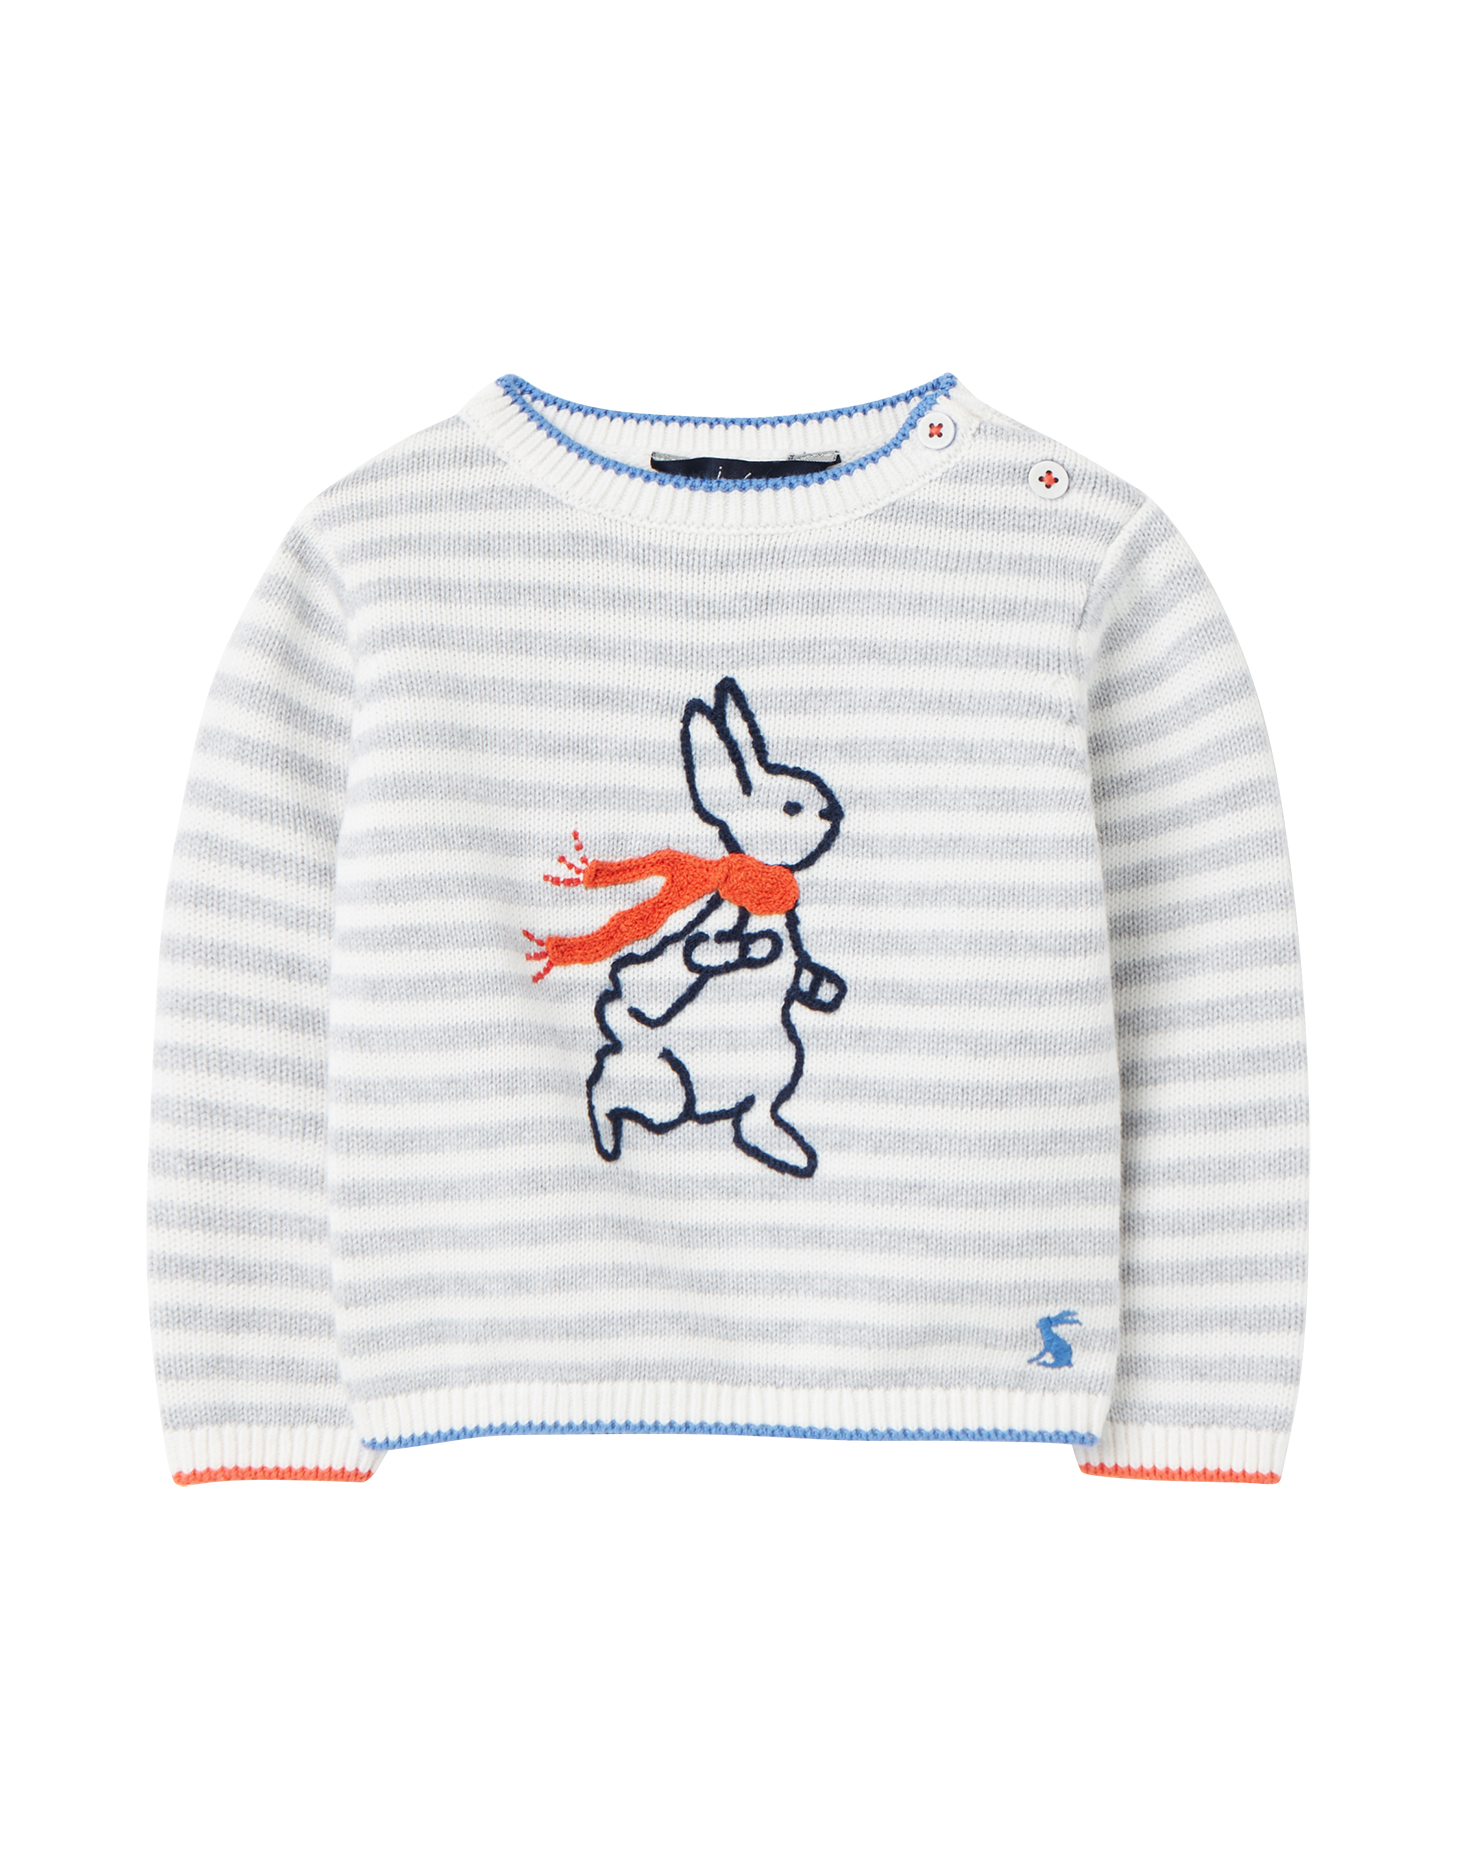 Joules Baby Peter Rabbit Knitted Jumper - English Designer Gifts